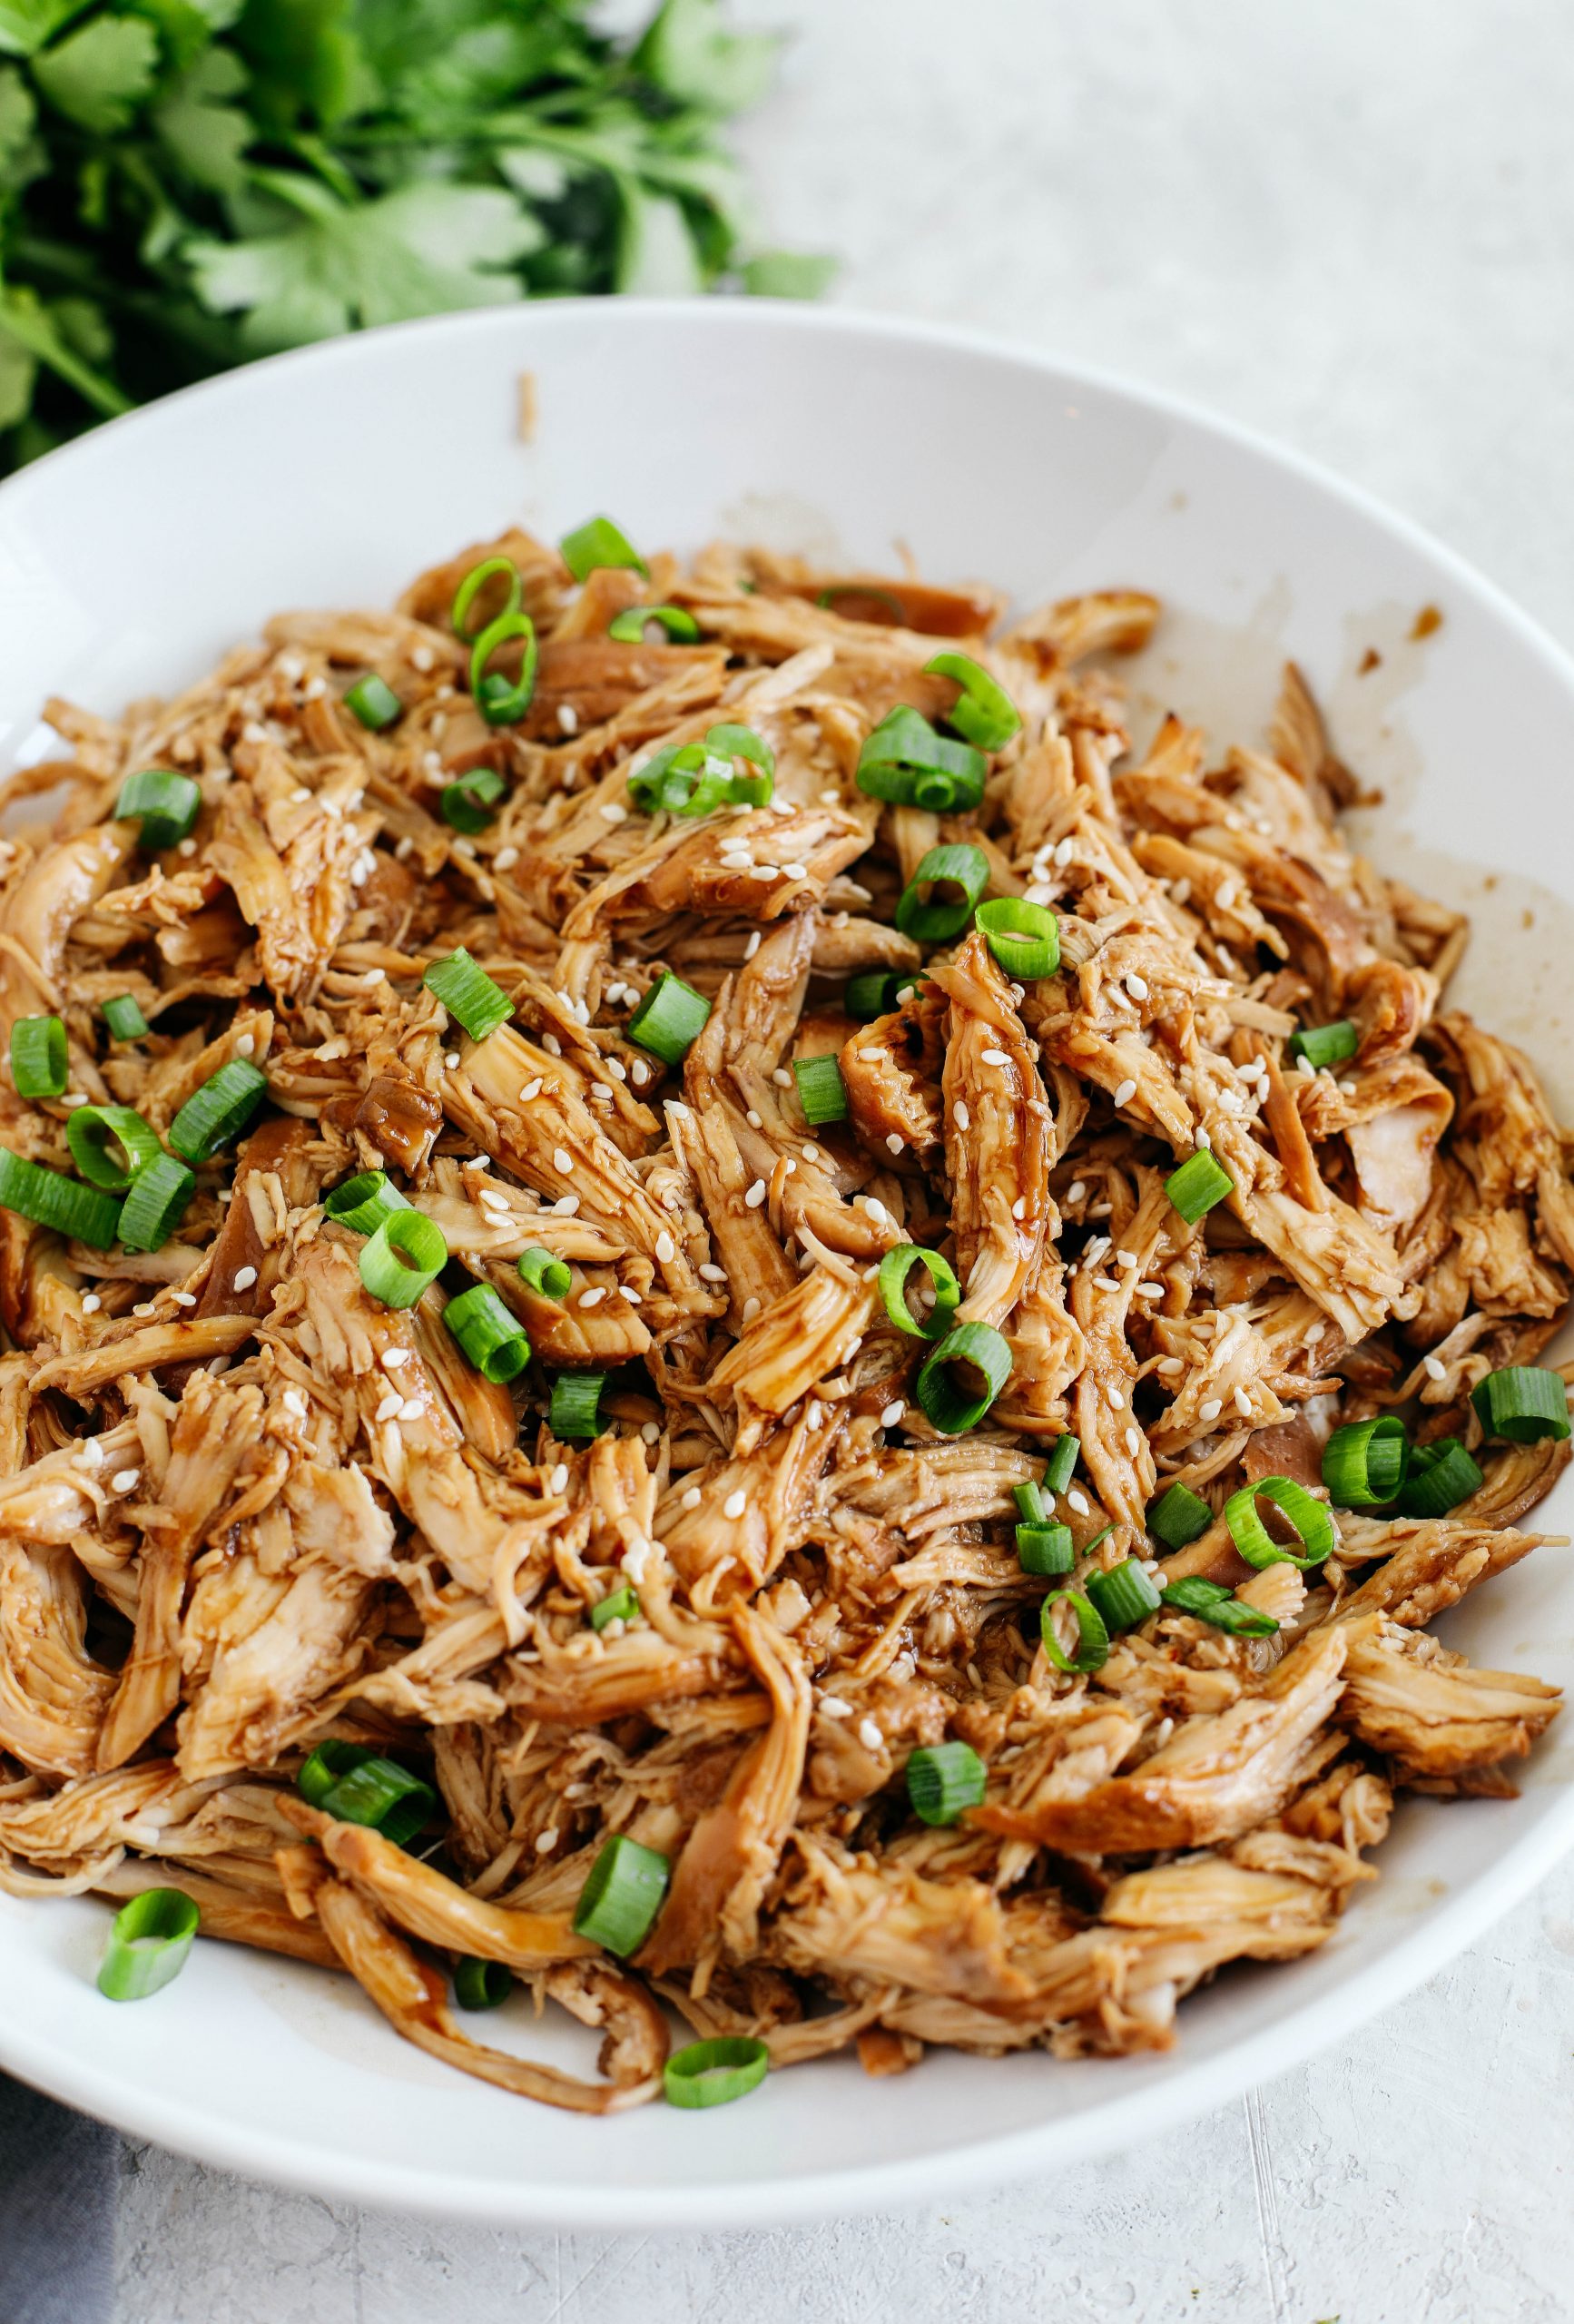 The EASIEST Crock Pot Teriyaki Chicken made with the most delicious sticky, sweet homemade sauce and served over rice or quinoa!  Better than take-out!